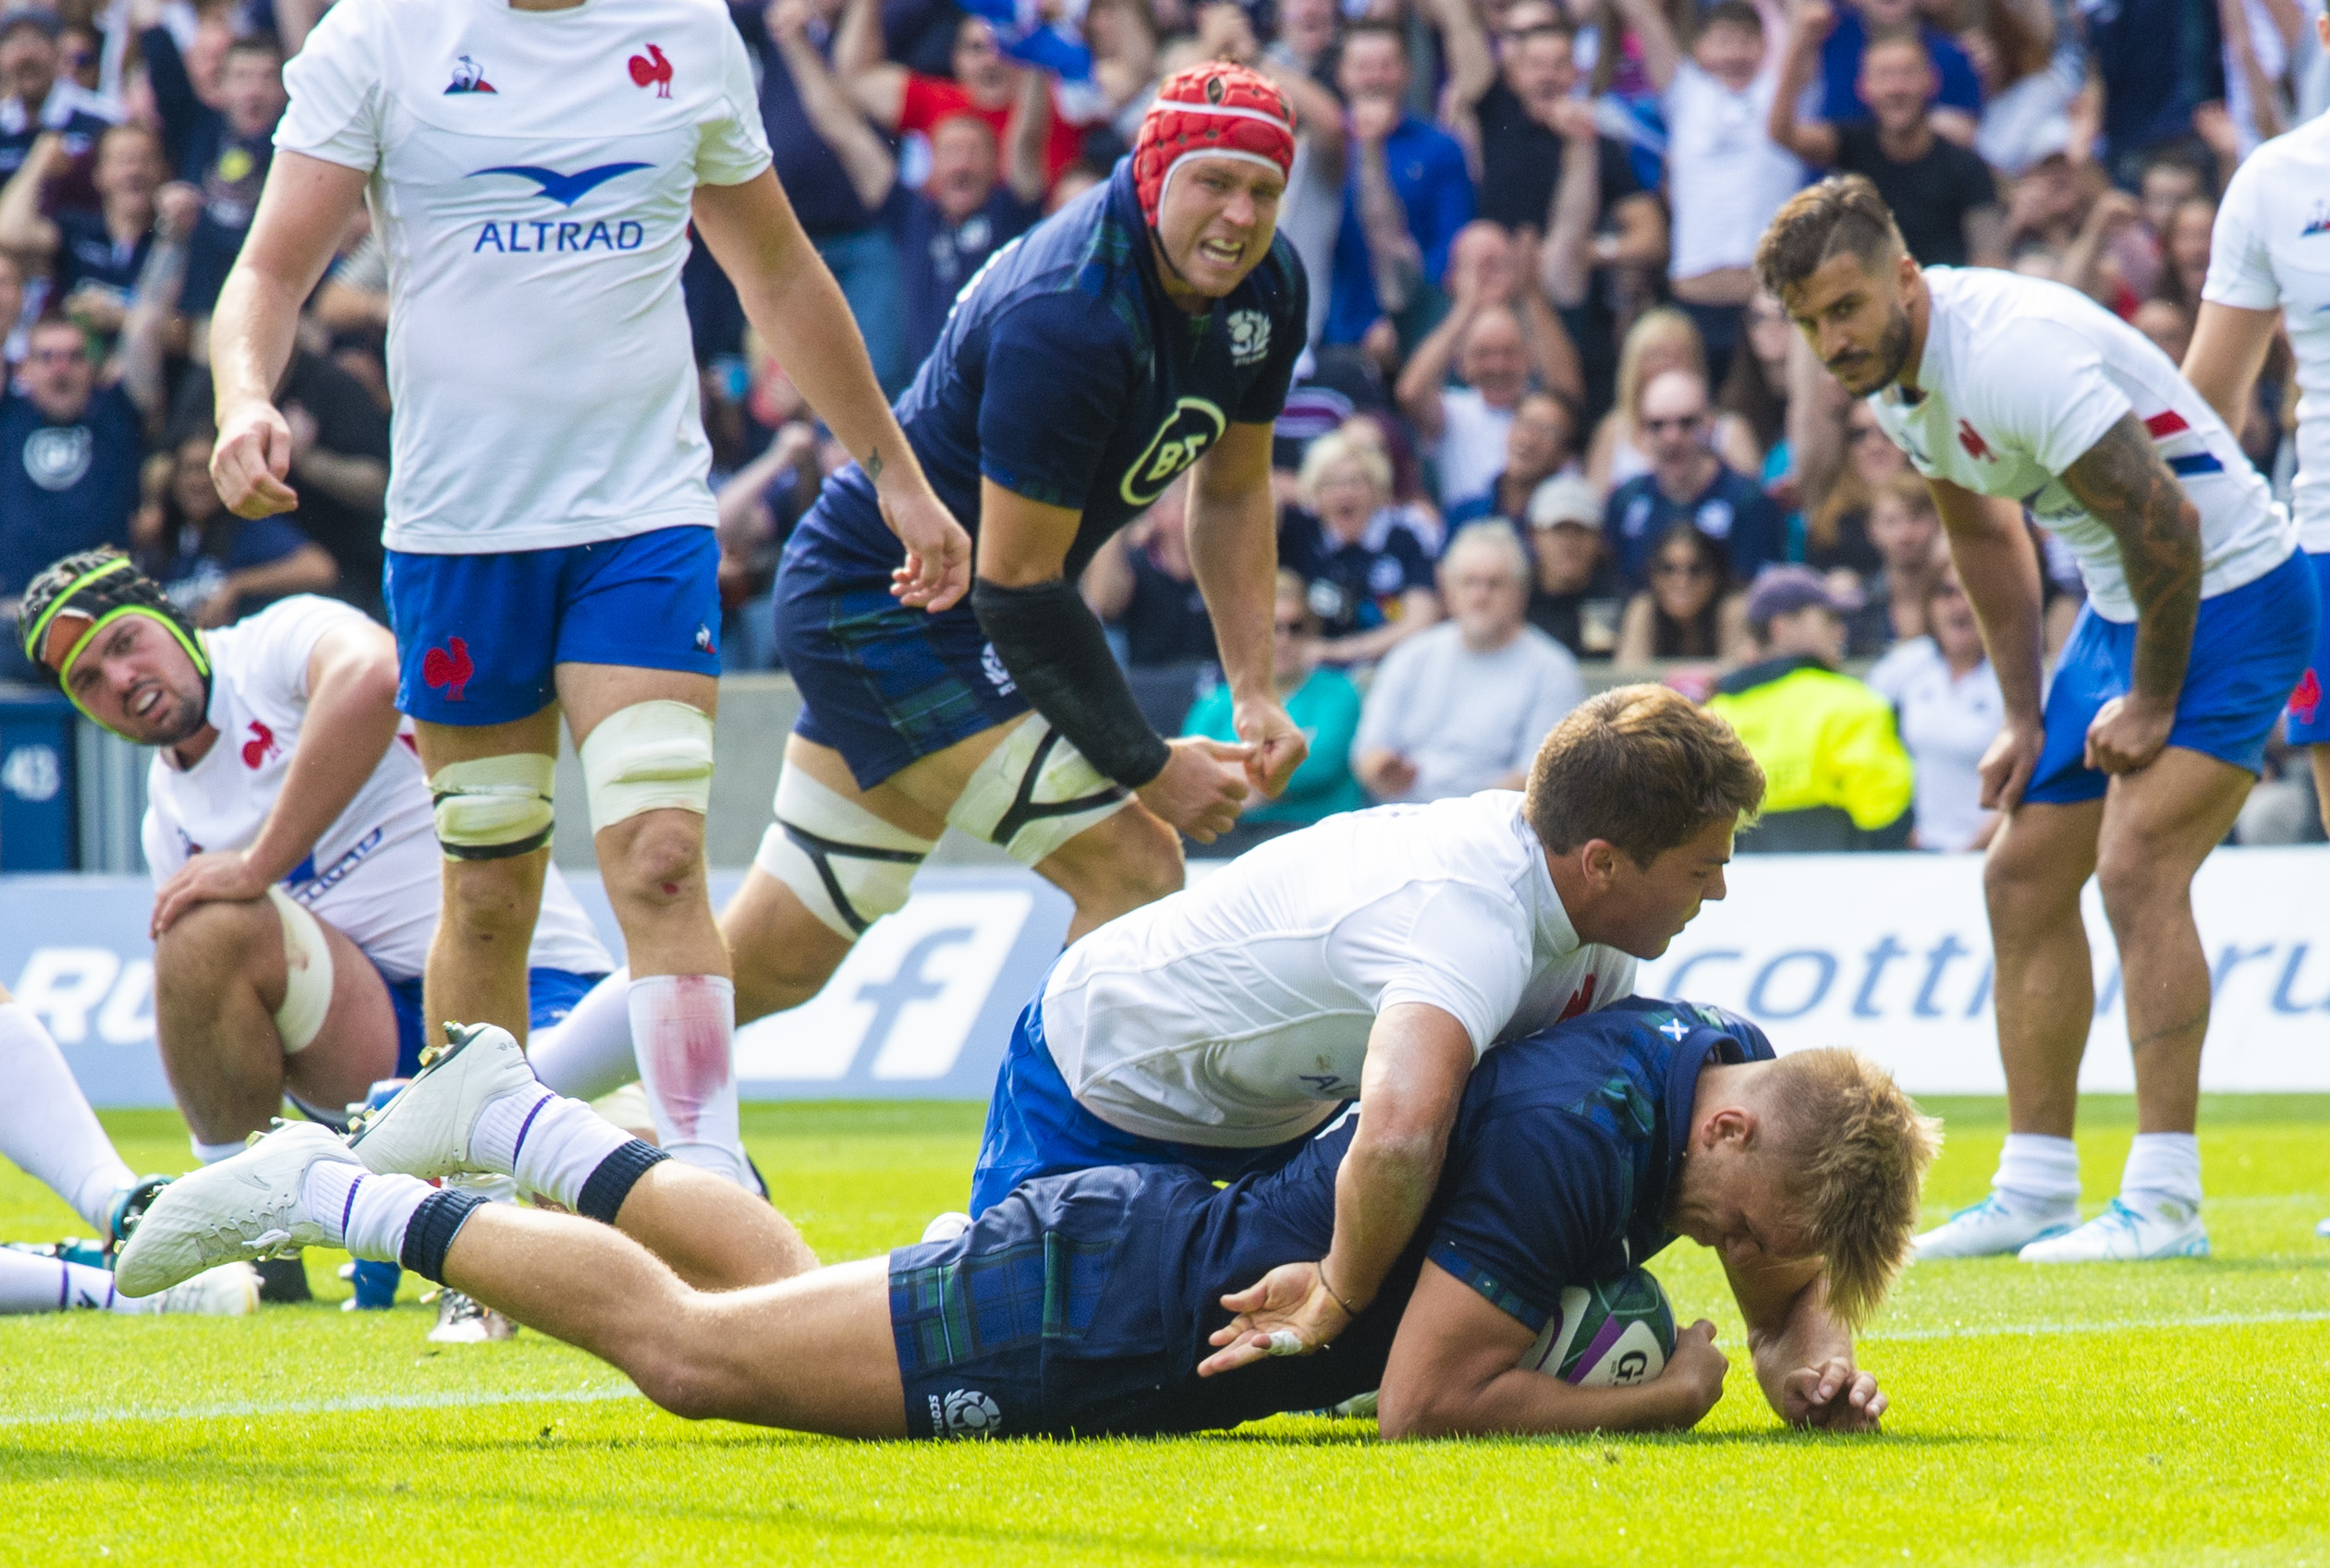 Chris Harris scores the key try as Scotland play France at Murrayfield in August.